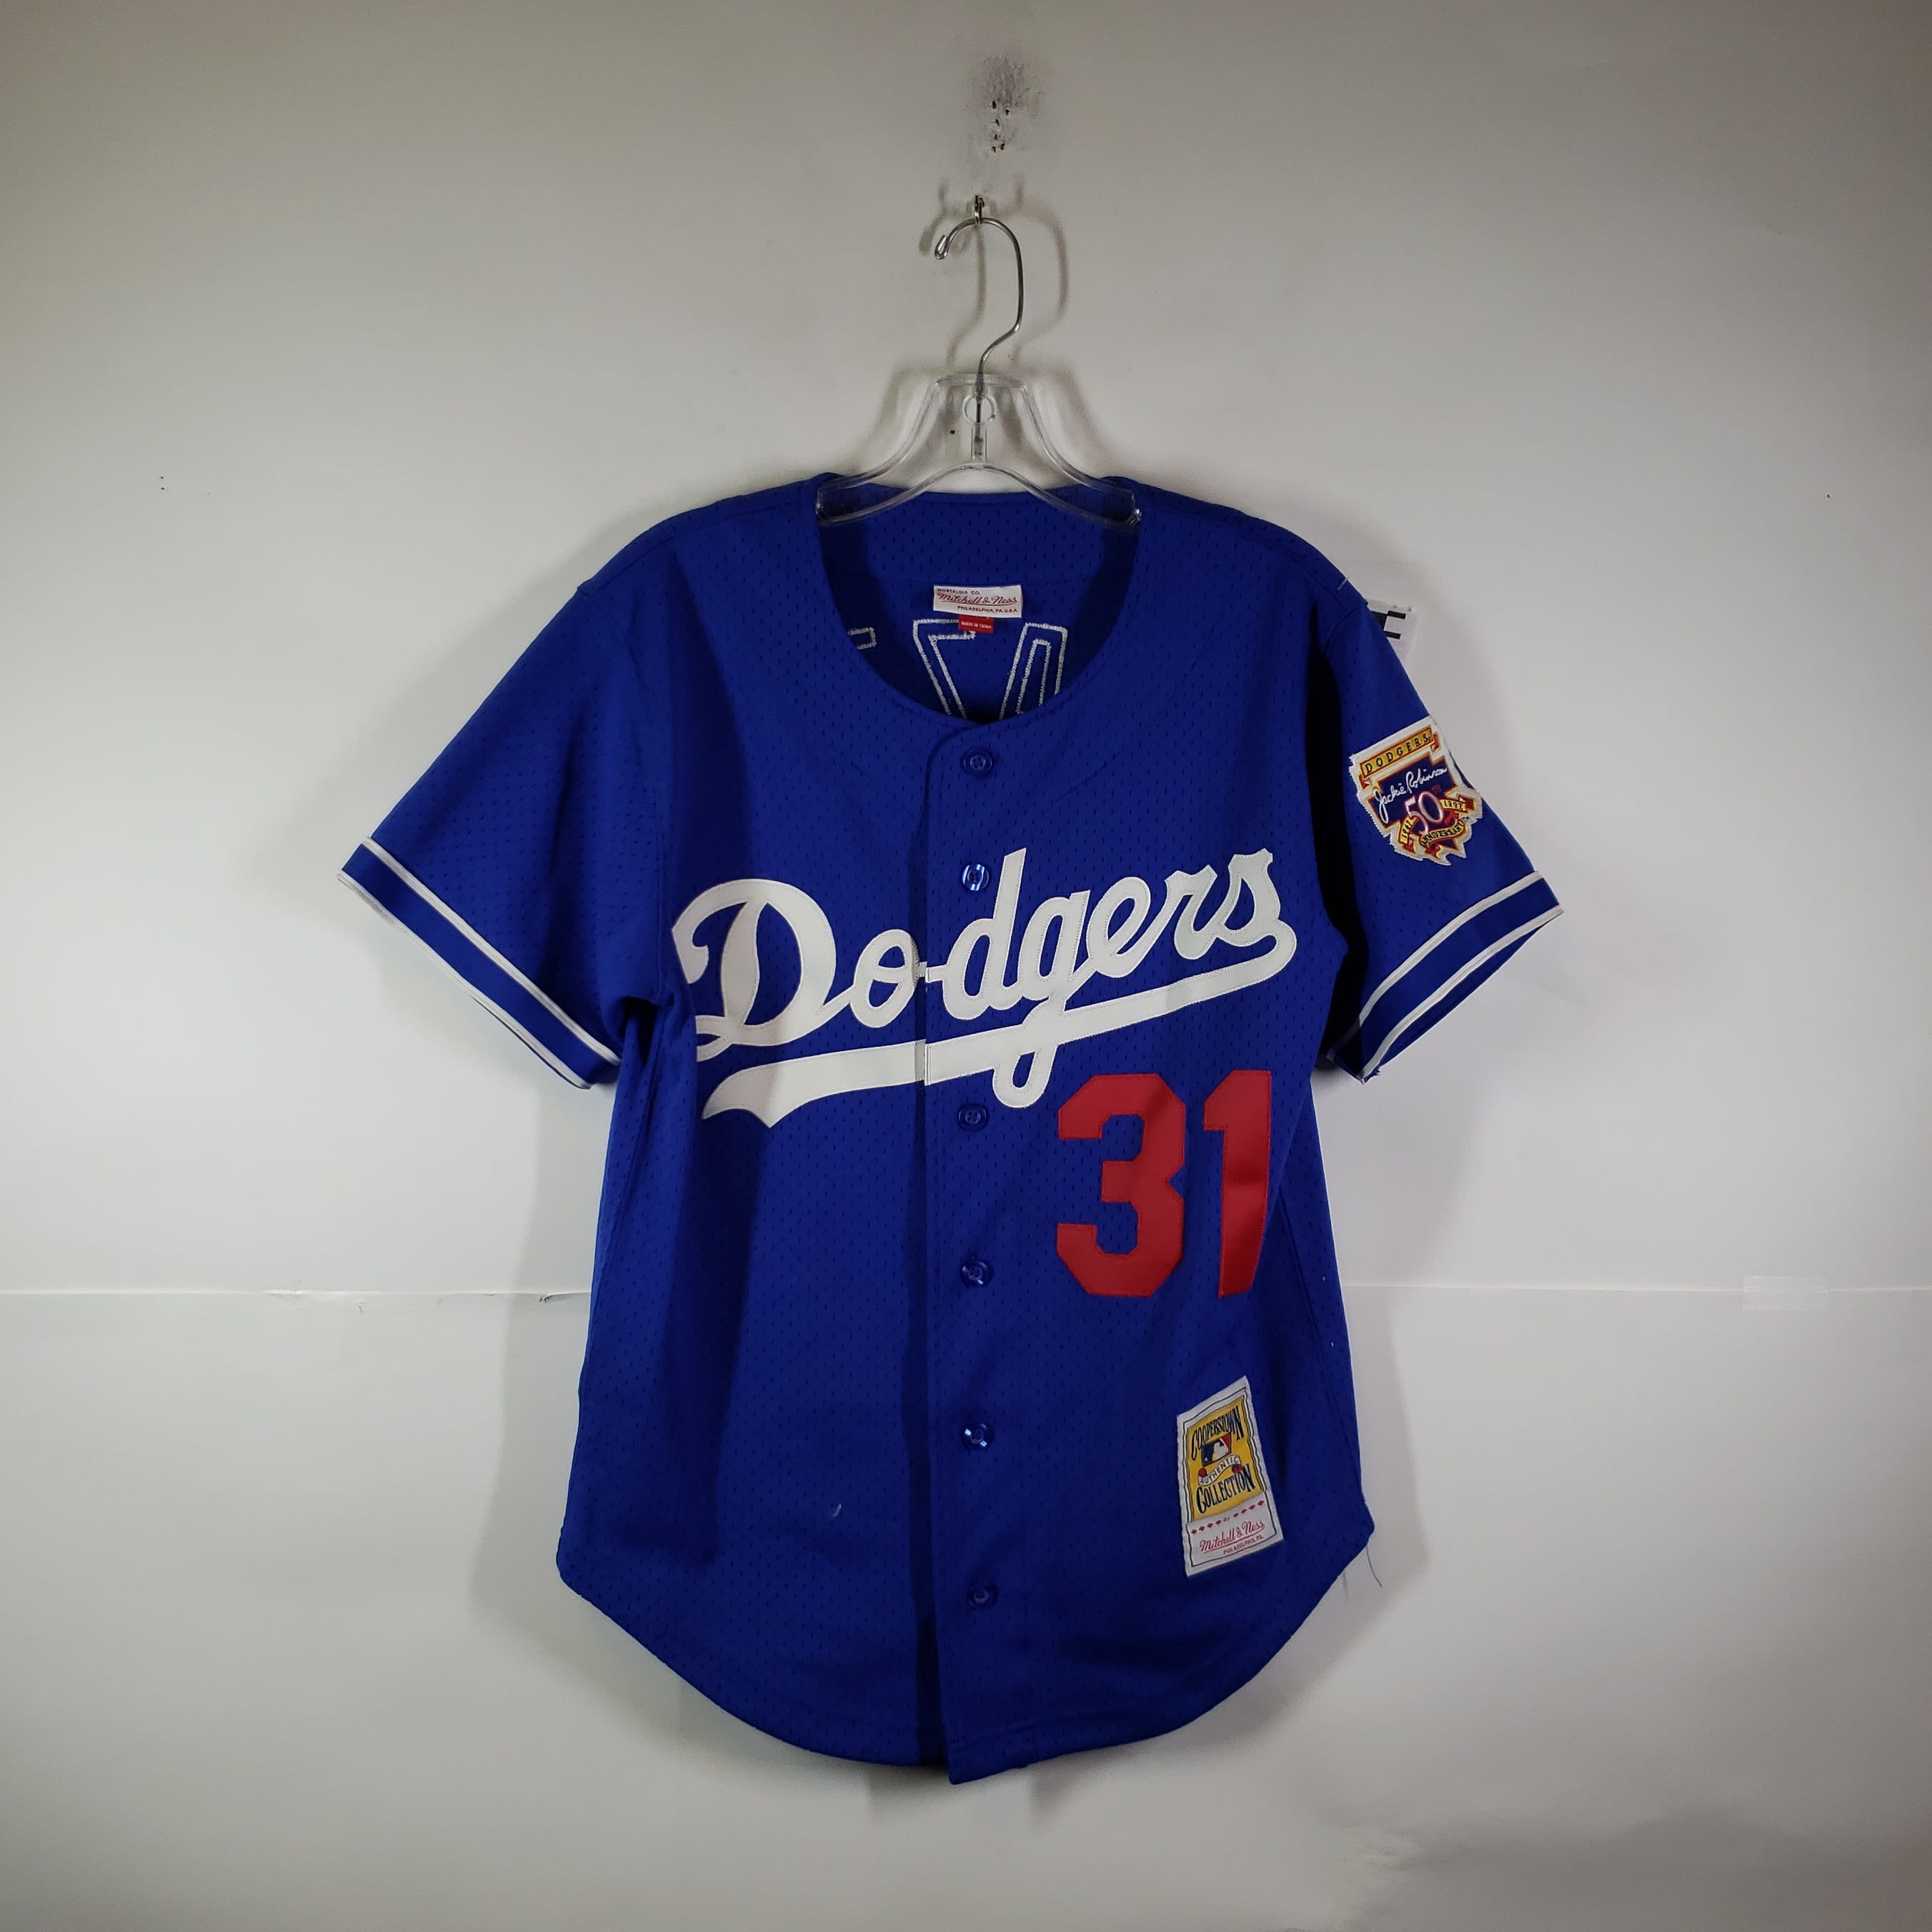 dodgers piazza jersey